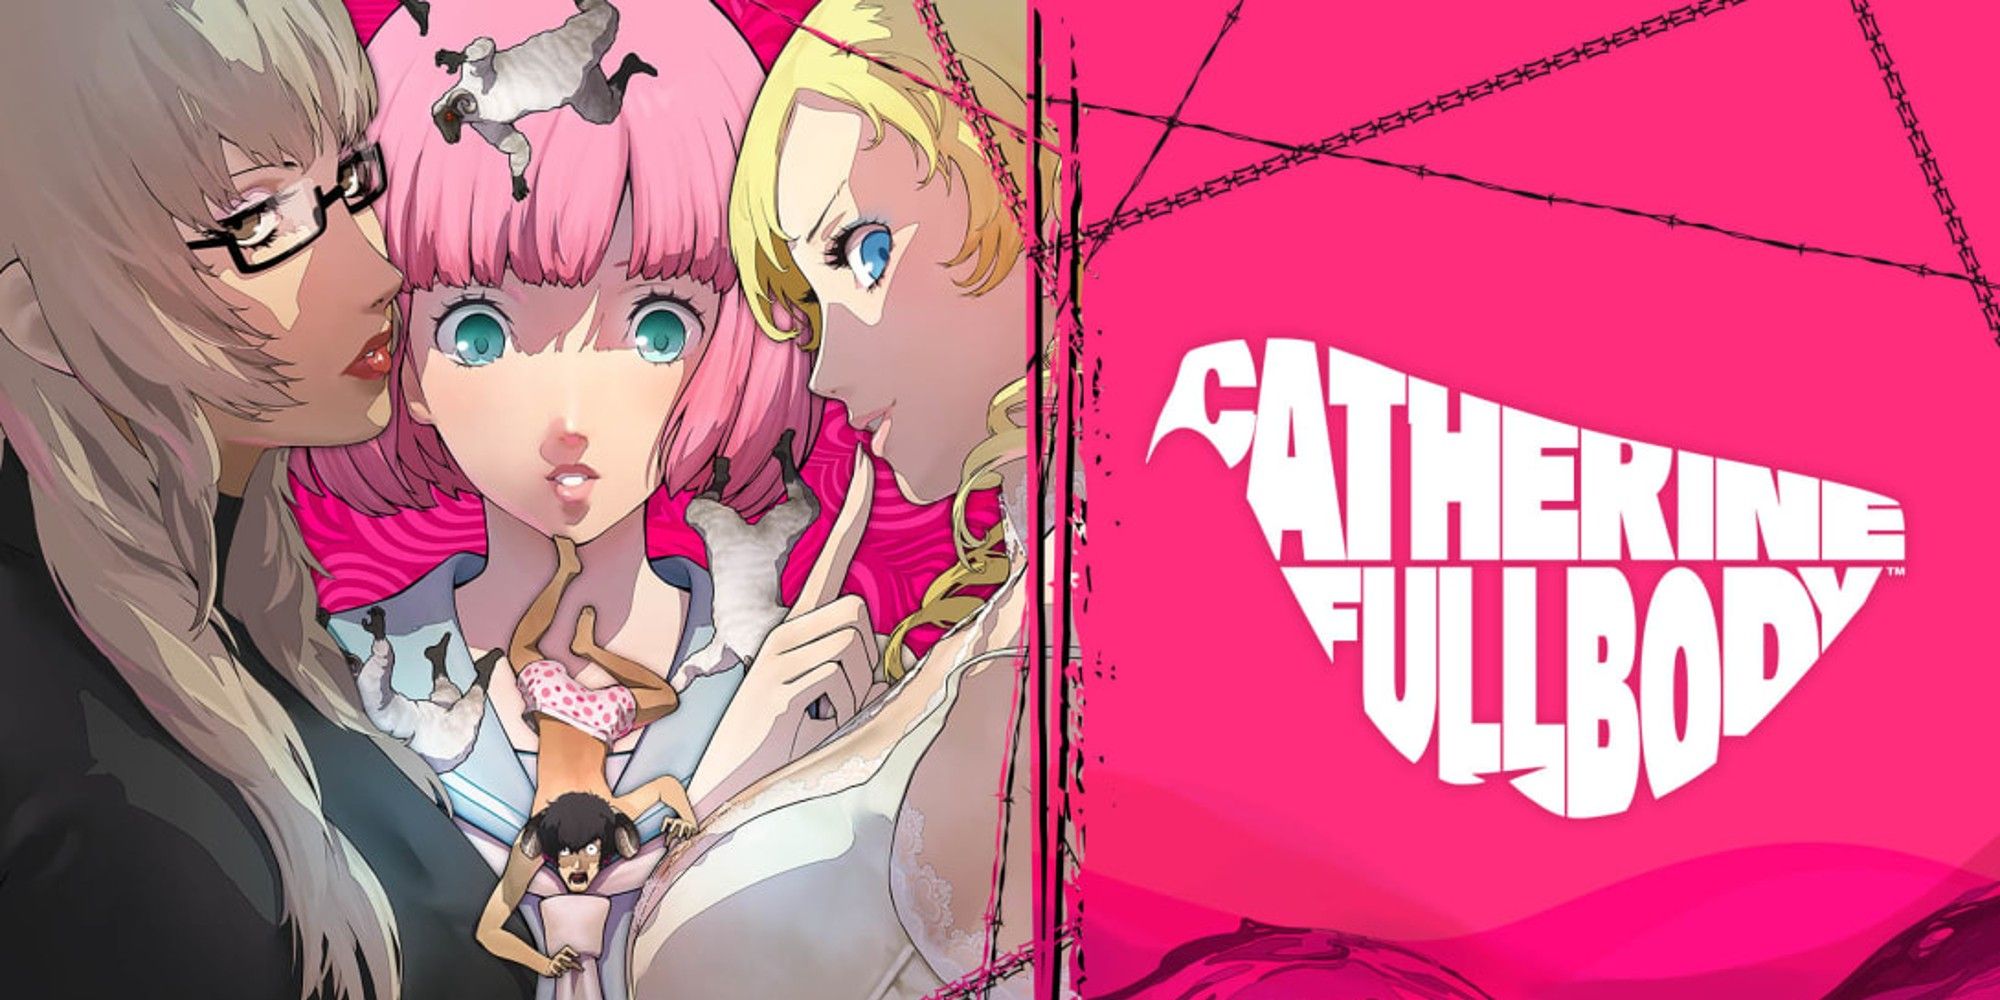 all three 'catherine' characters posing with vincent in the center, with 'catherine fullbody' stylized on side